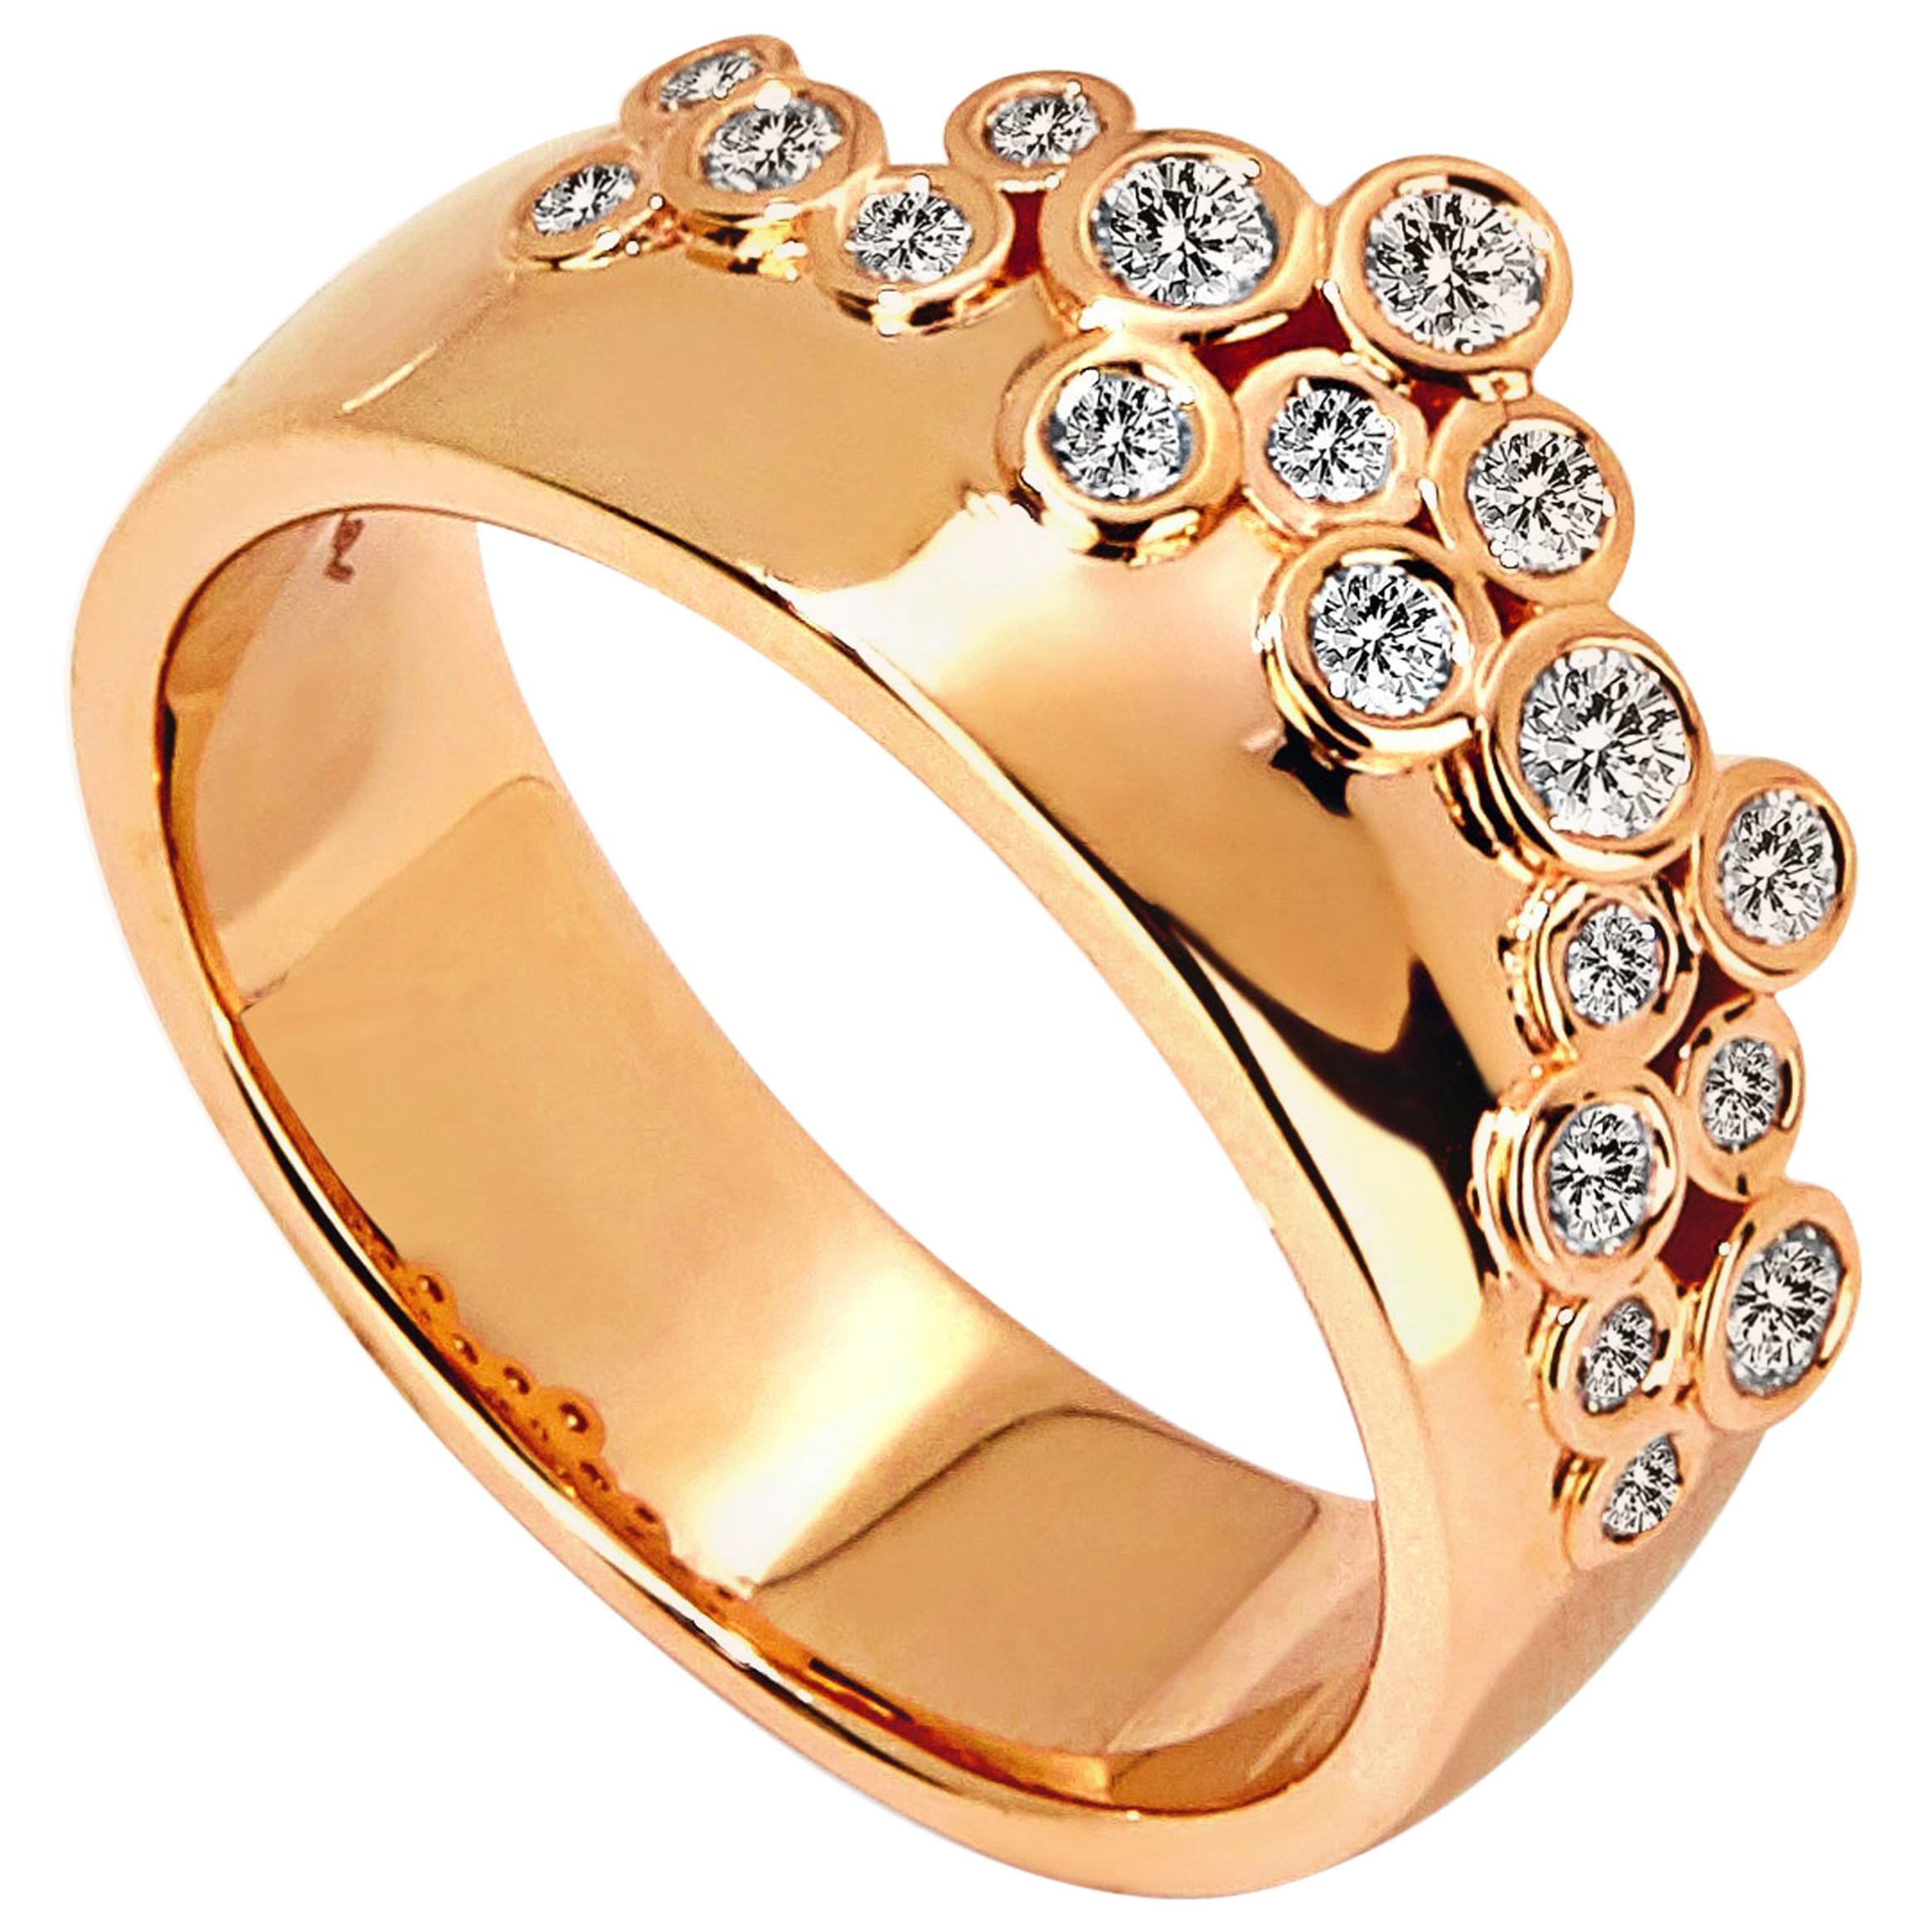 Syna Rose Gold Band with Champagne Diamonds